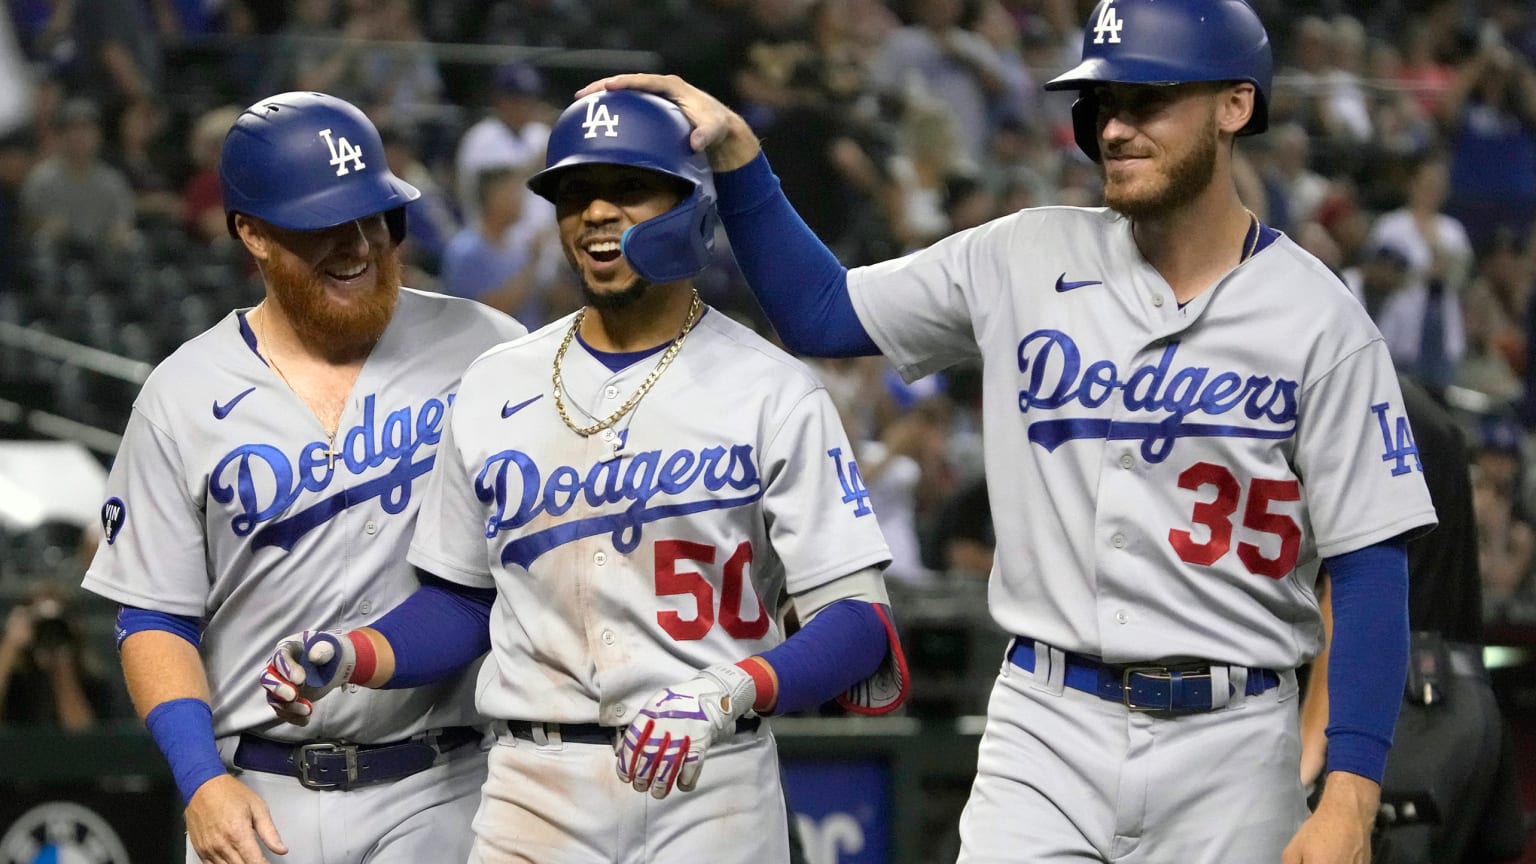 Dodgers Justin Turner, Mookie Betts and Cody Bellinger celebrate after a Betts home run